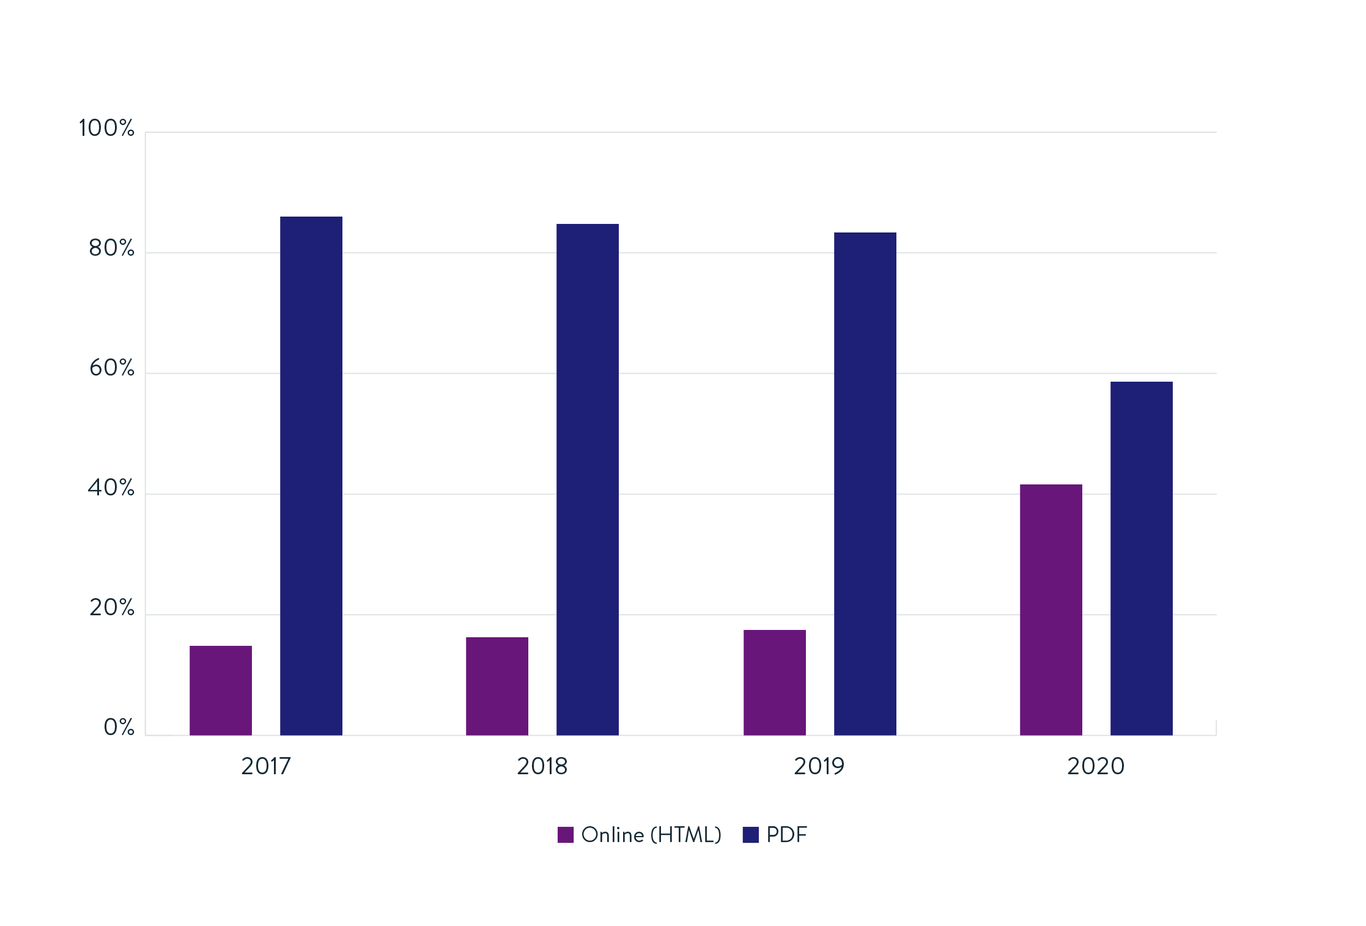 Bar chart showing data on format preferences for years 2017 to 2020, with "Online (HTML)" in blue and "PDF" in purple. Online HTML preference decreases over time, while PDF increases in 2020.